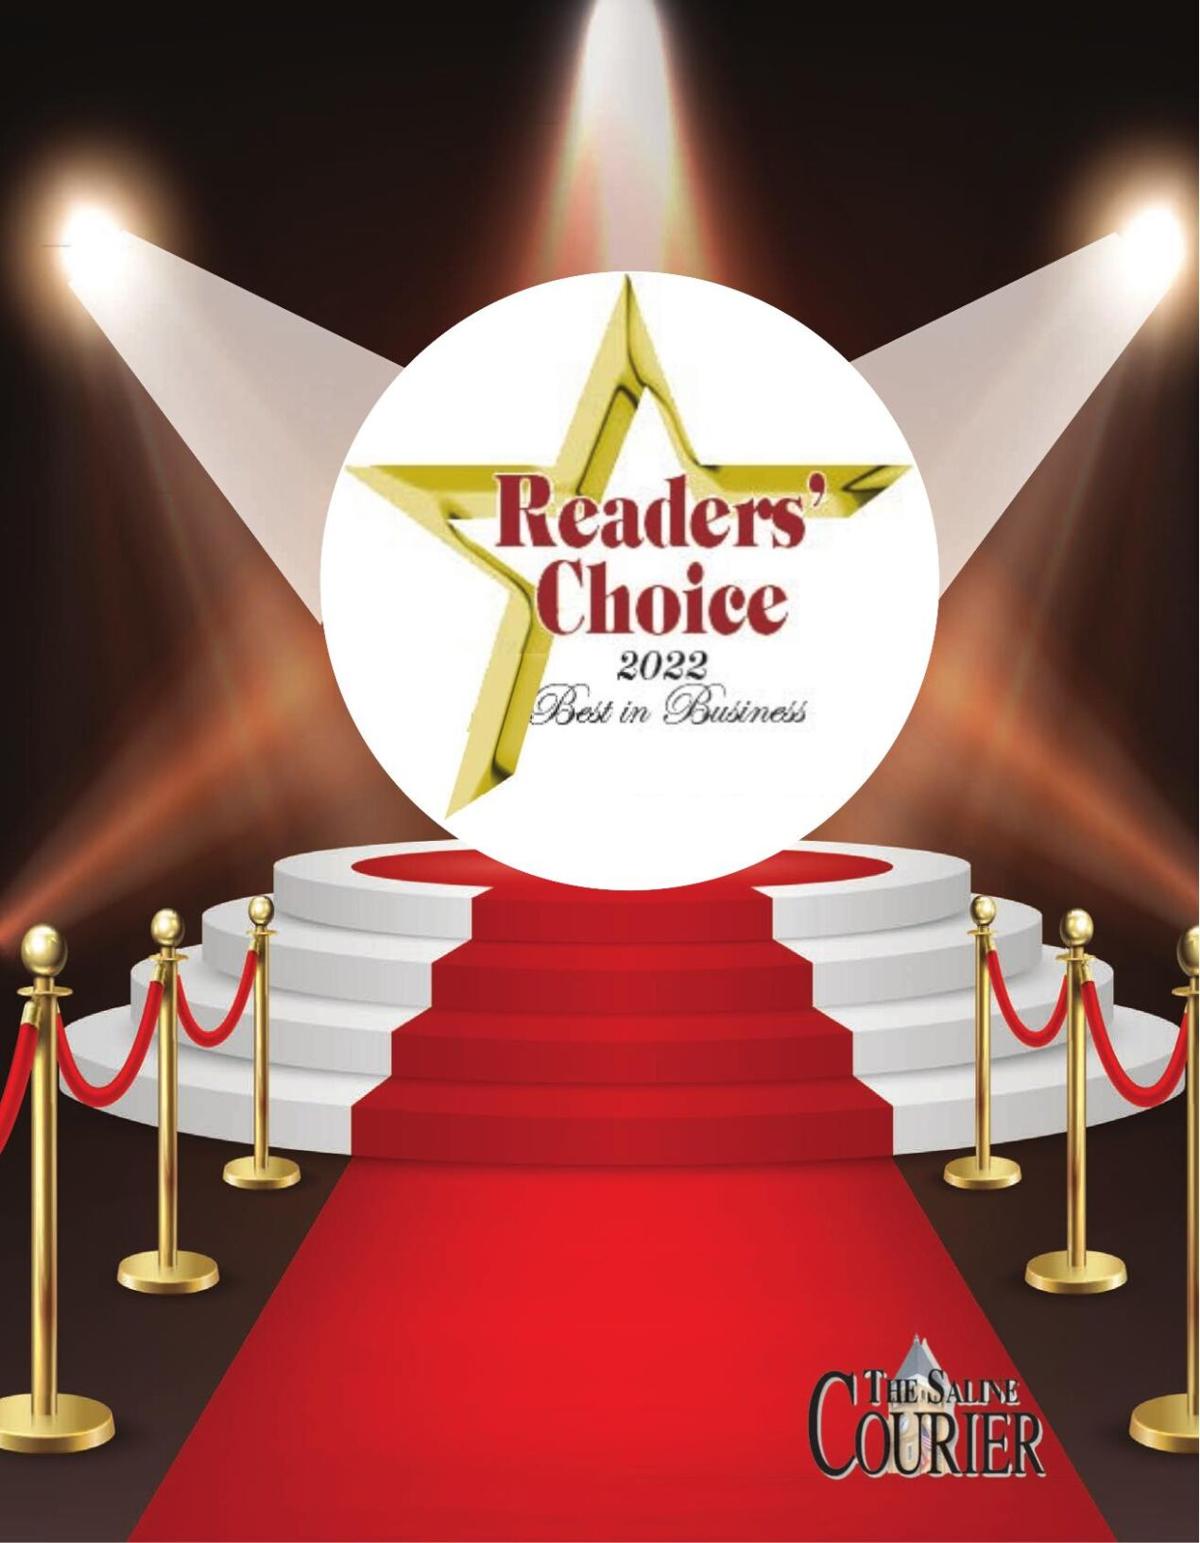 Best in Business Readers' Choice 2022 winners magazine